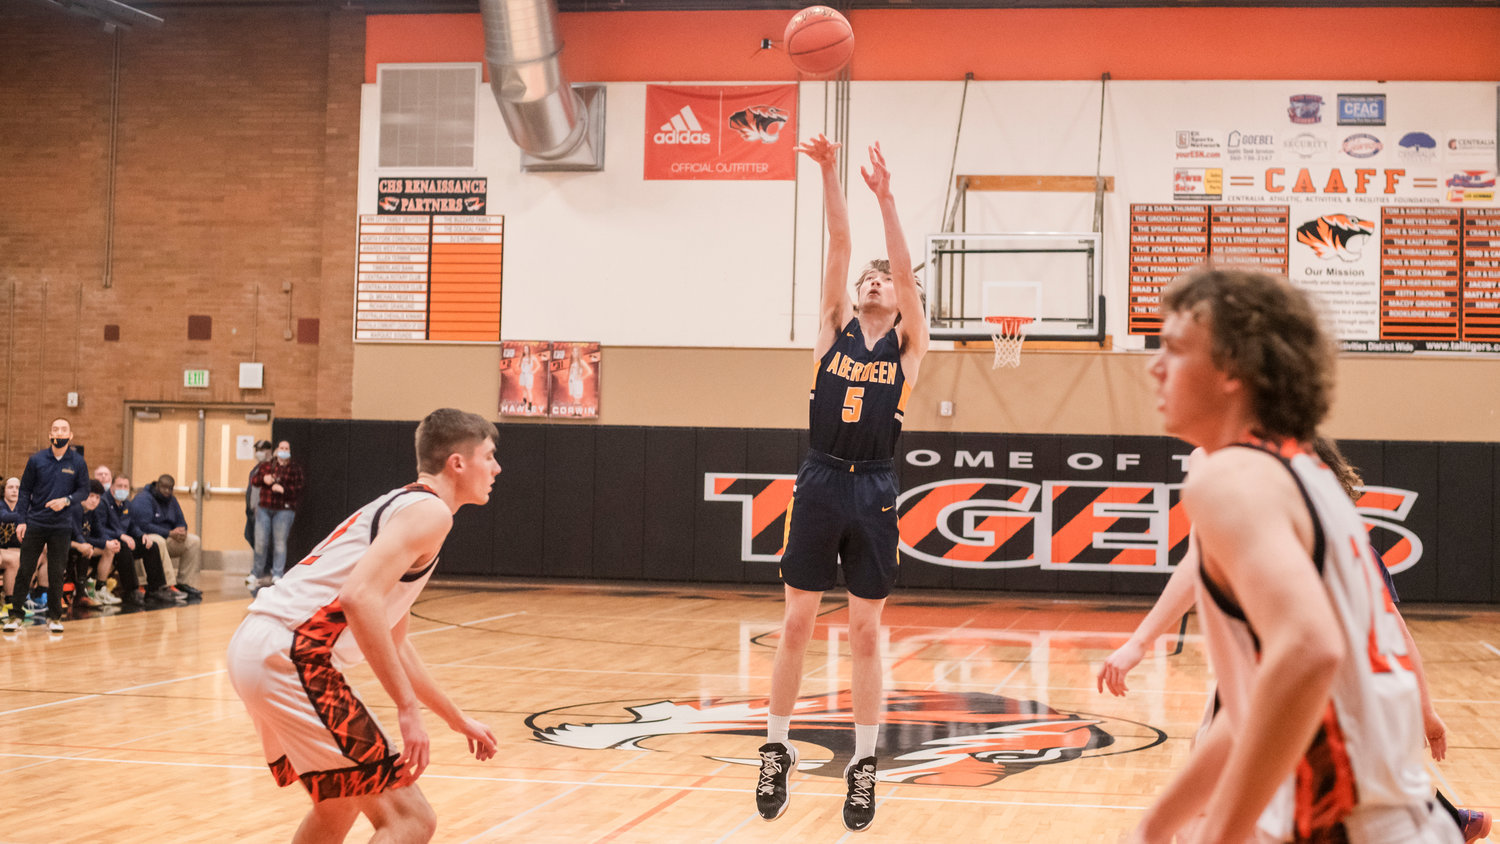 Aberdeen senior Andrew Troeh (5) puts up a shot Friday night during a game in Centralia.